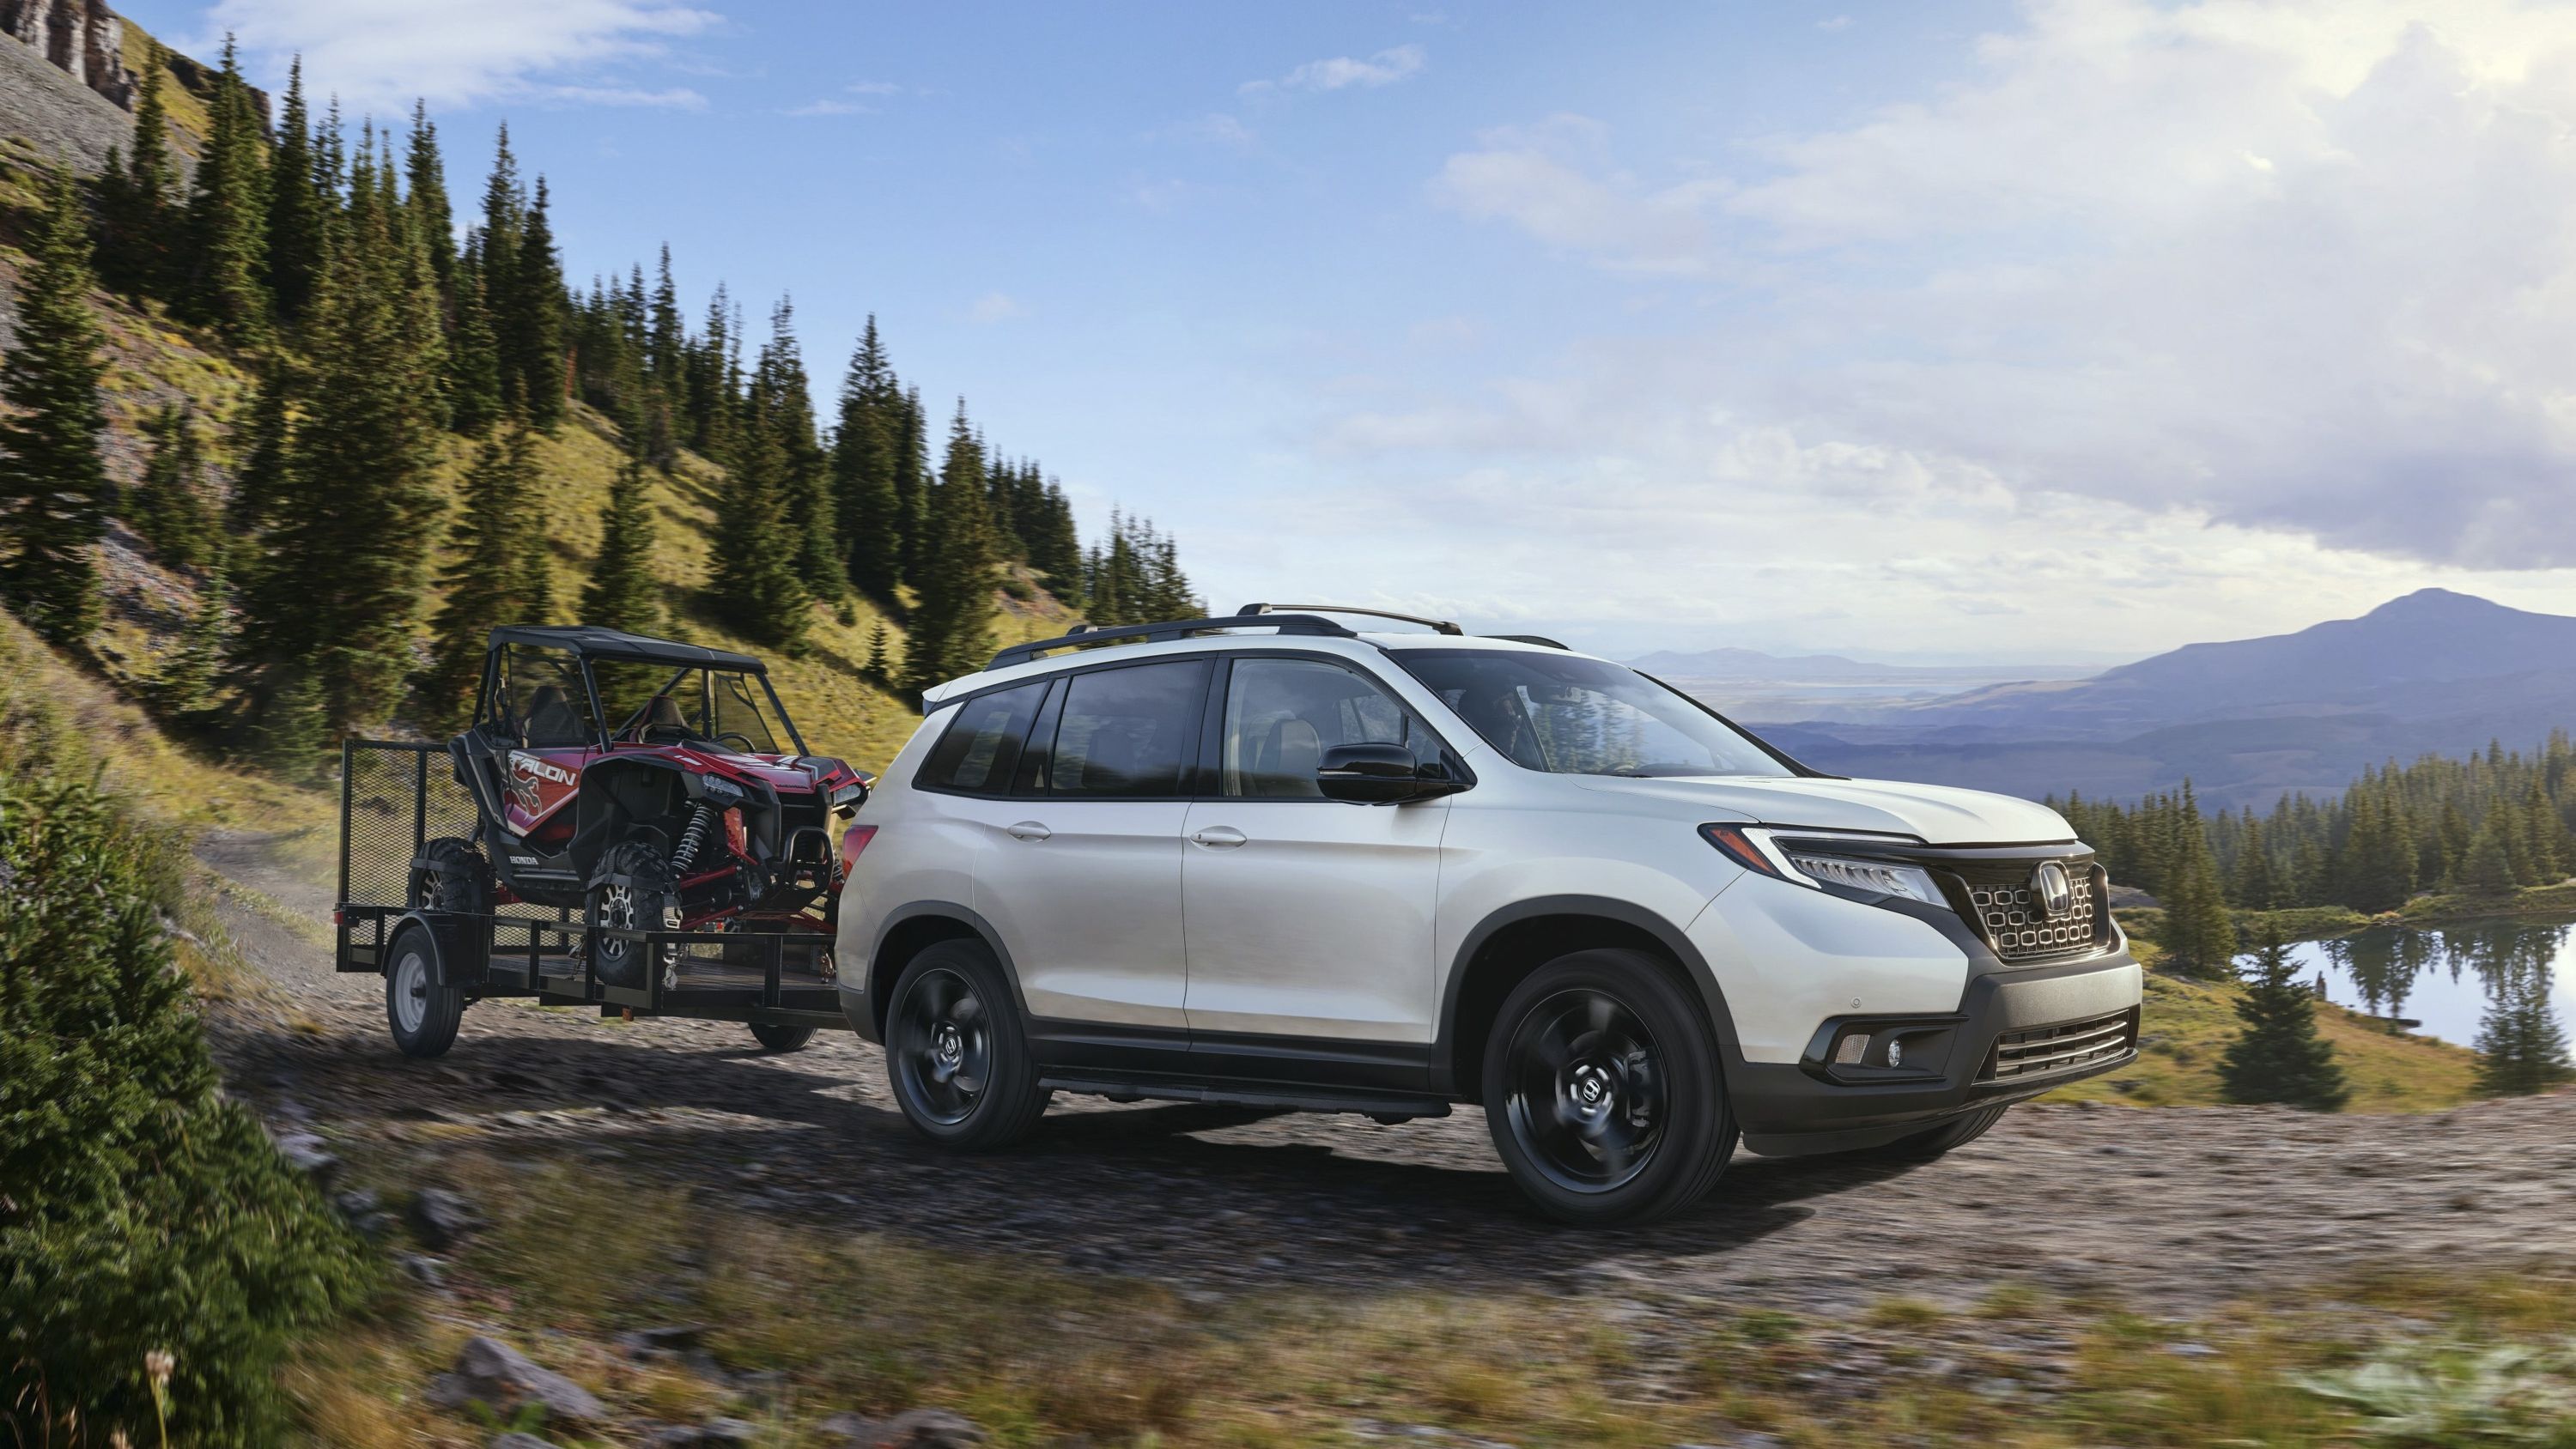 Honda Touts The New Passport SUV As its Resident Off-Roader